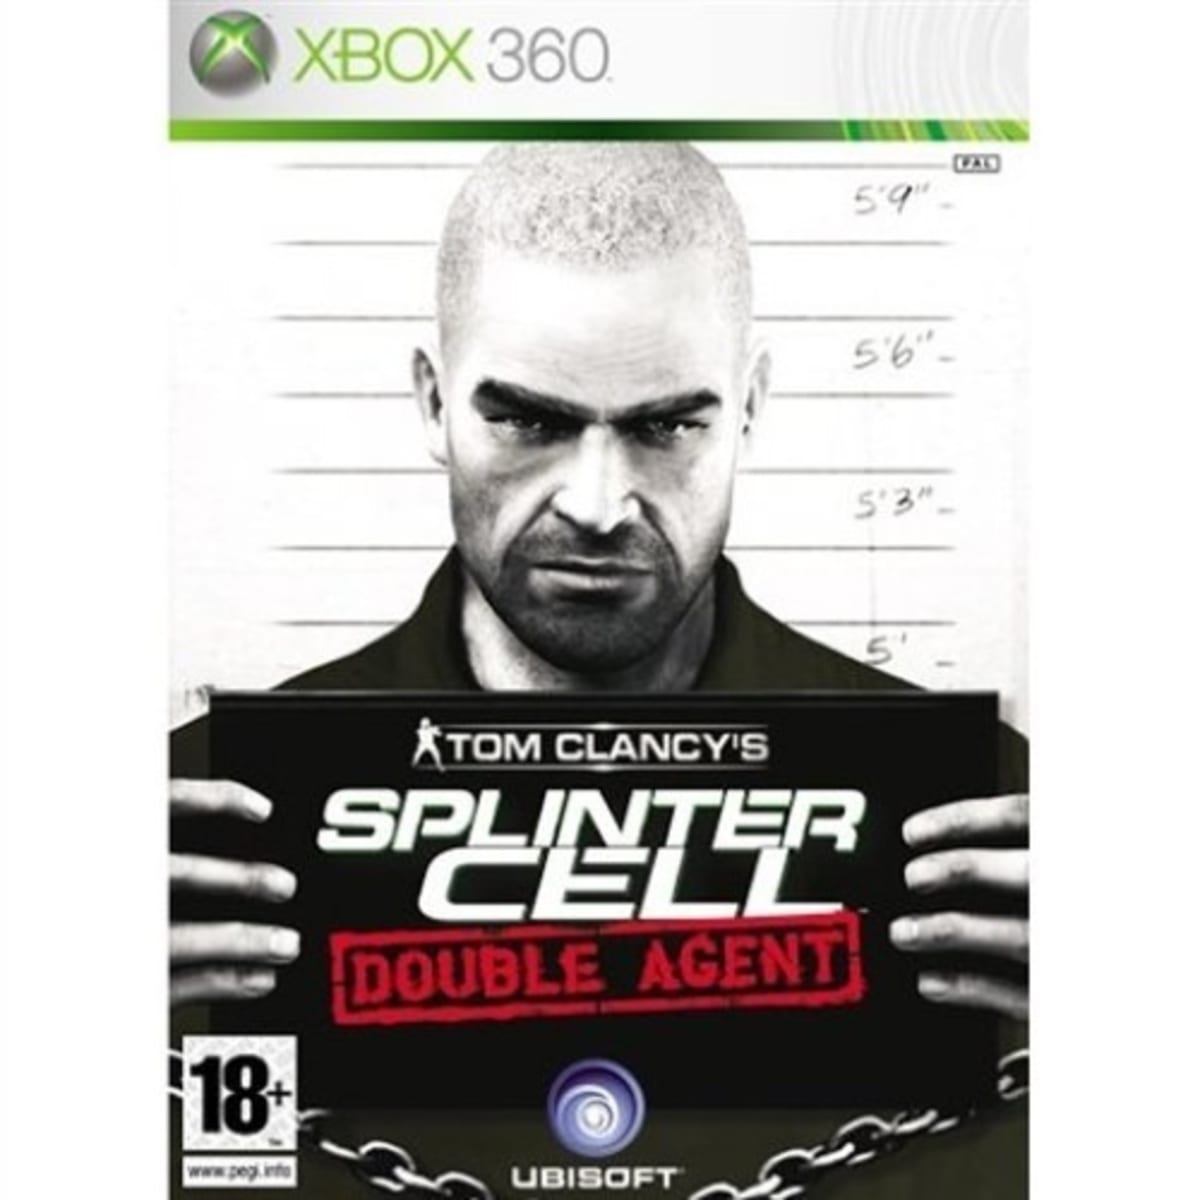 Tom Clancy's Splinter Cell:Double Agent BOX 360 USED Tested Work-no manual  8888522942